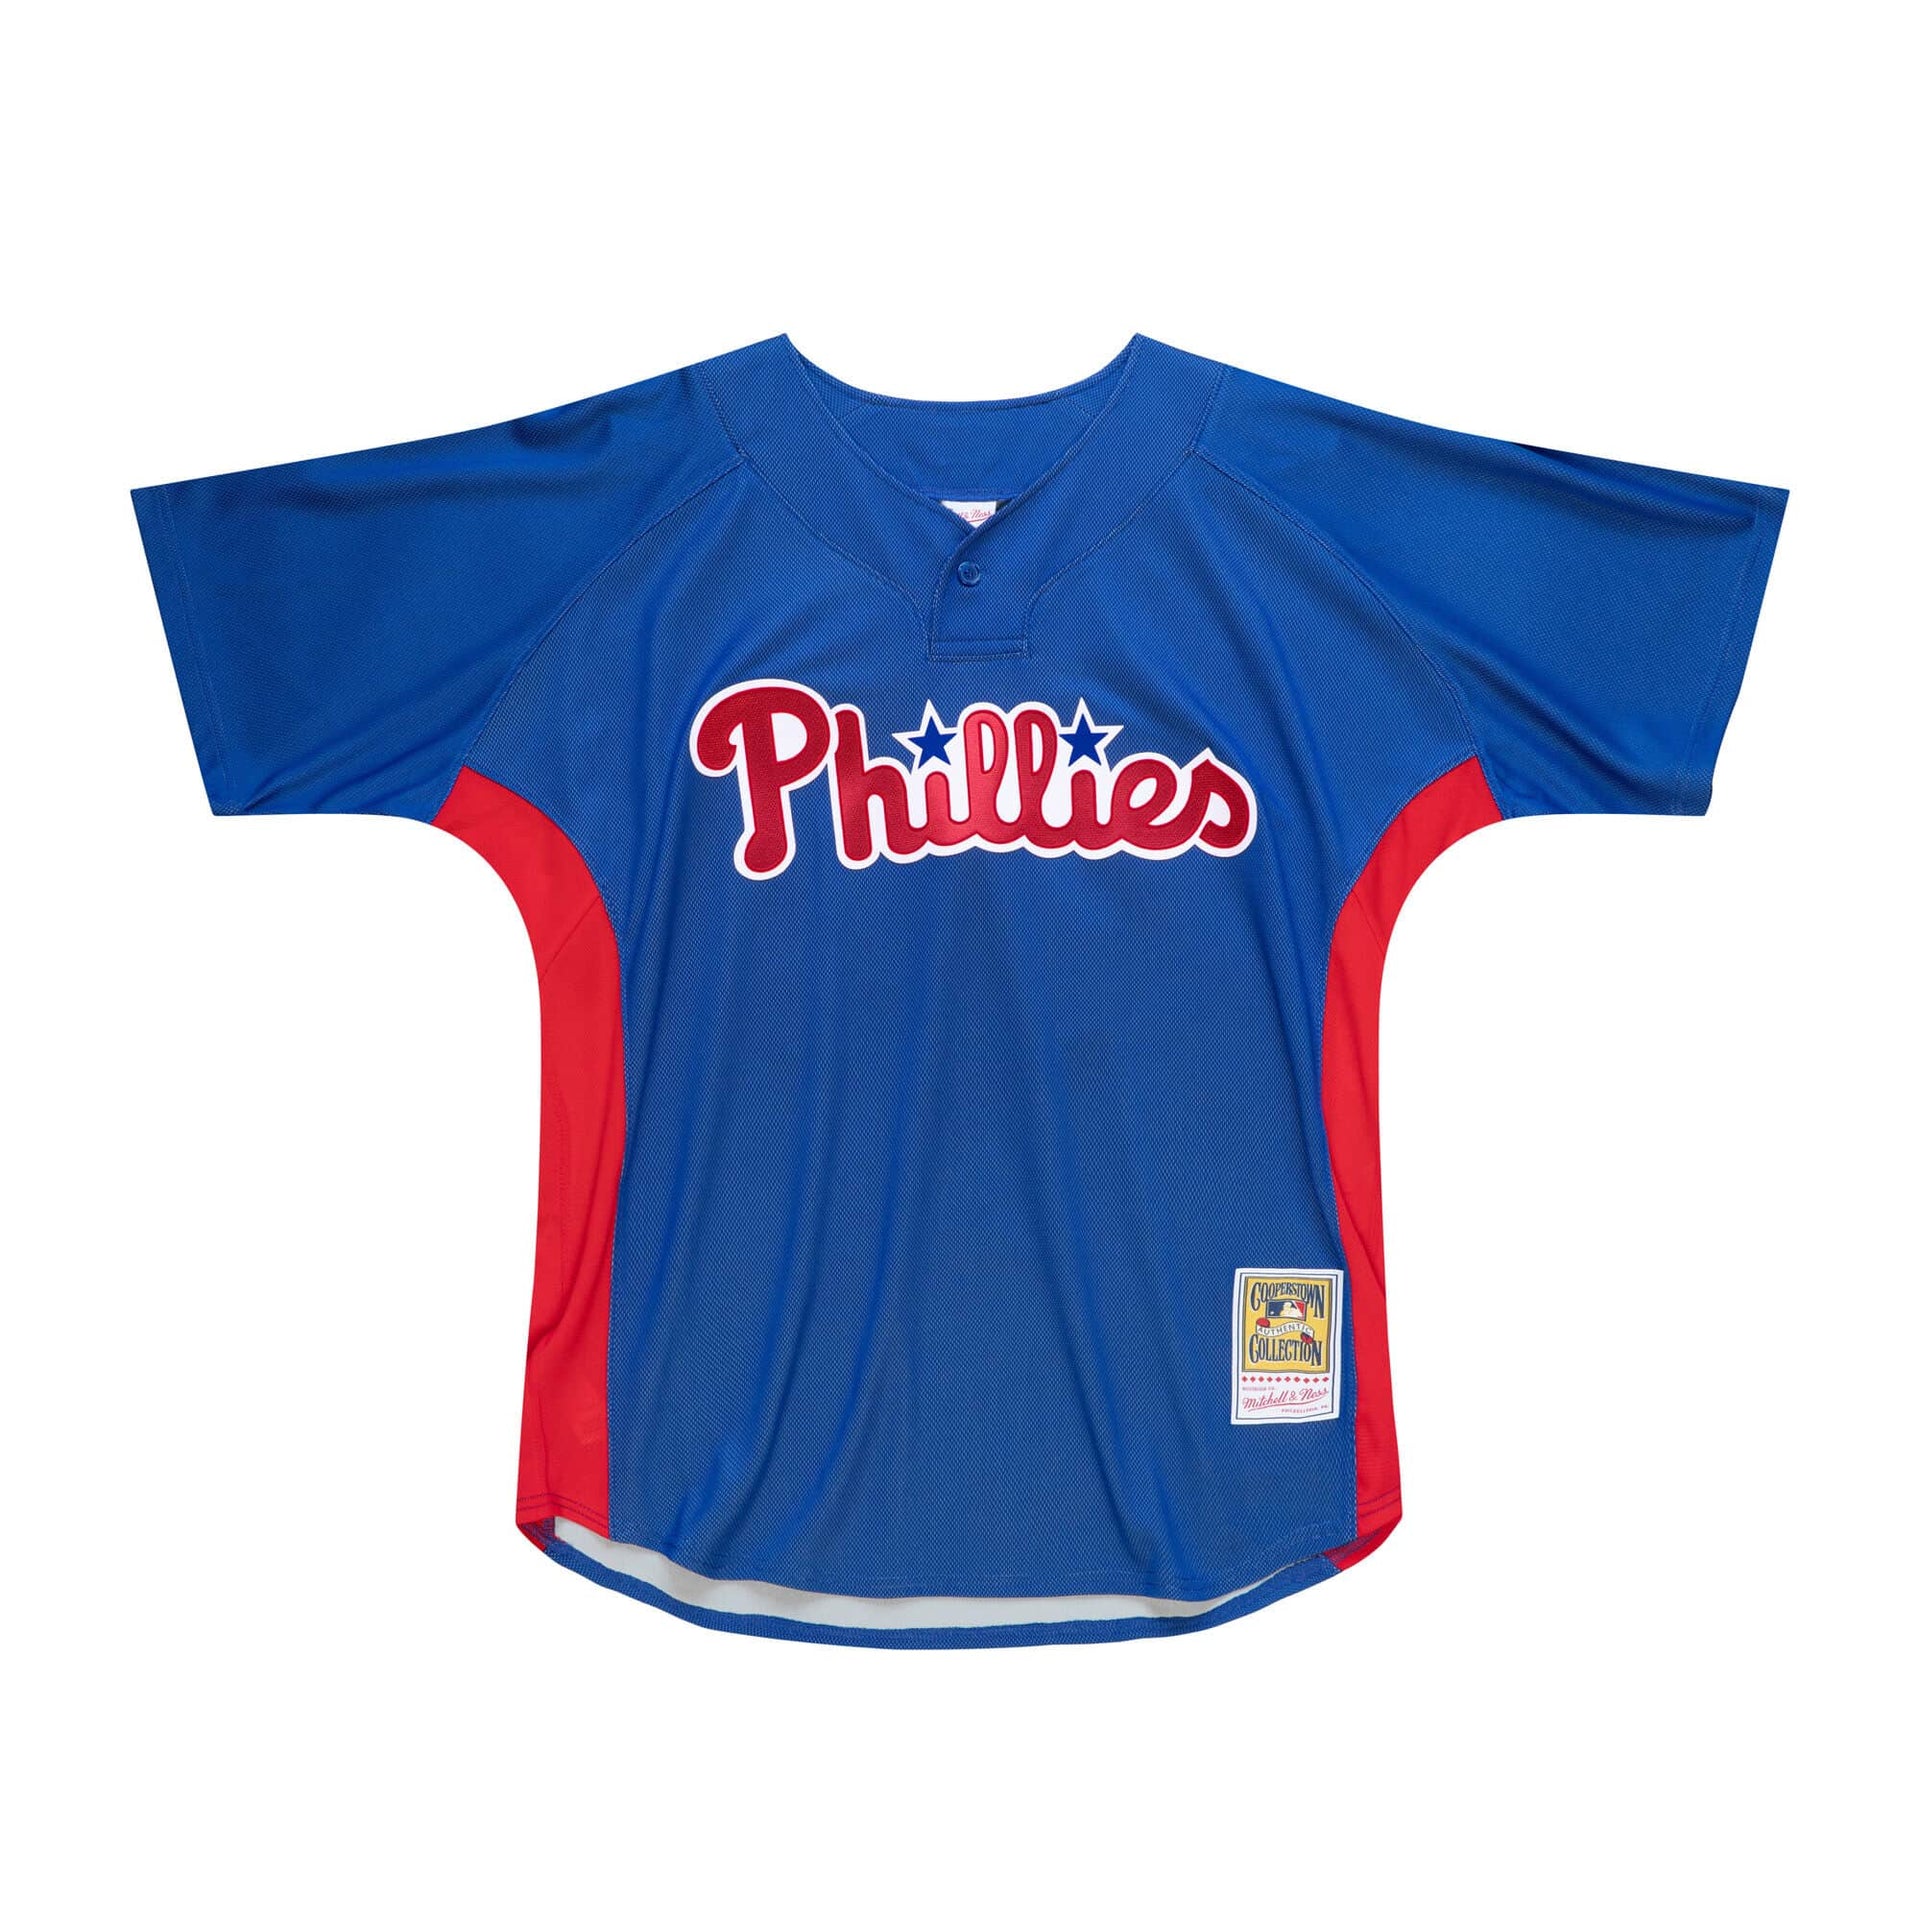 roy halladay hall of fame jersey